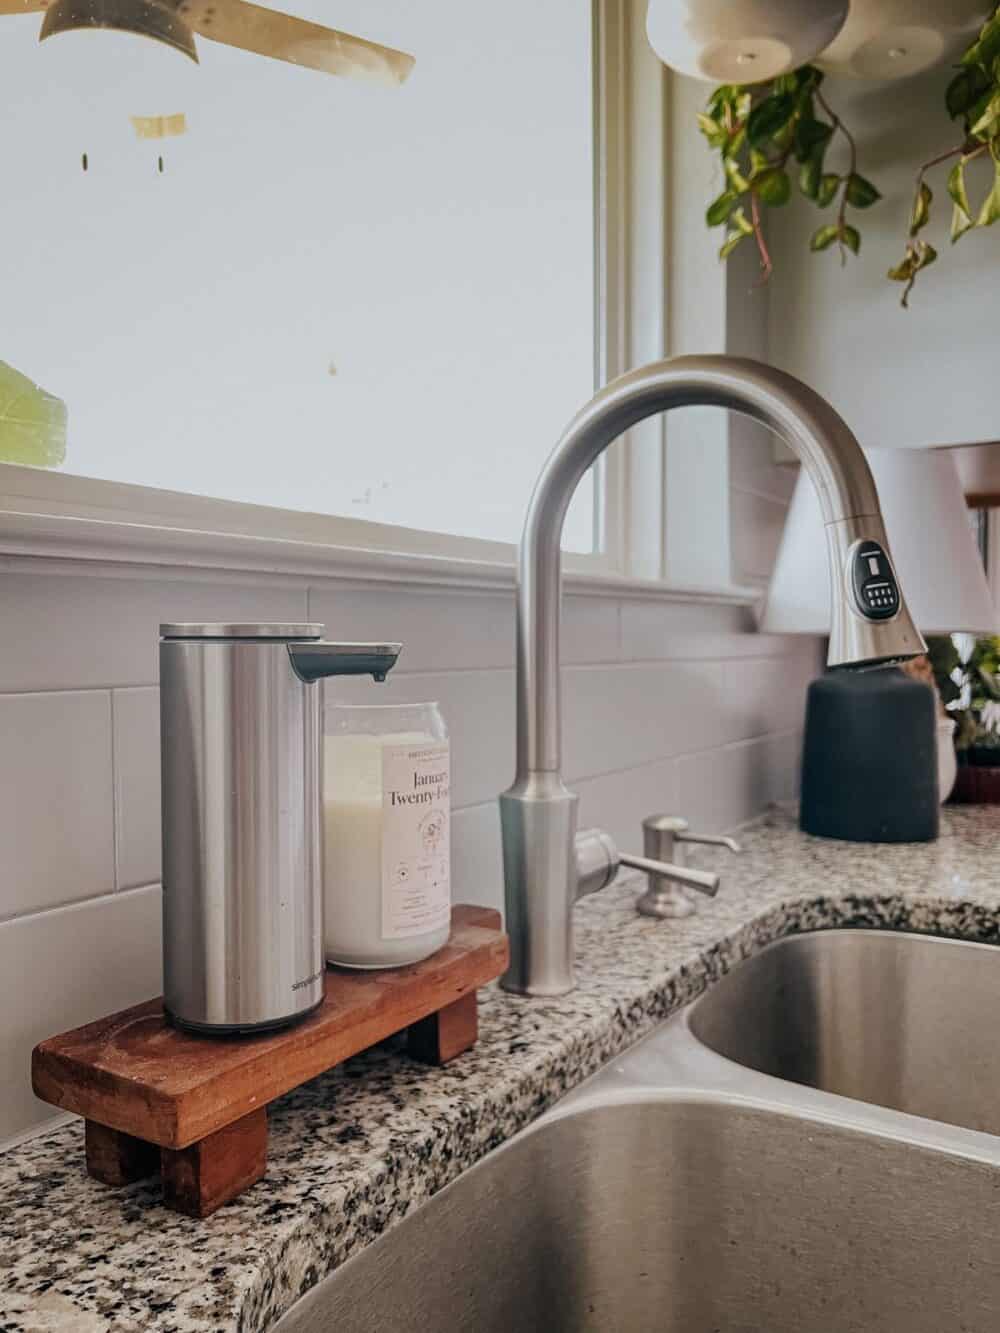 Kitchen sink with a wood pedestal holding soap and a candle 